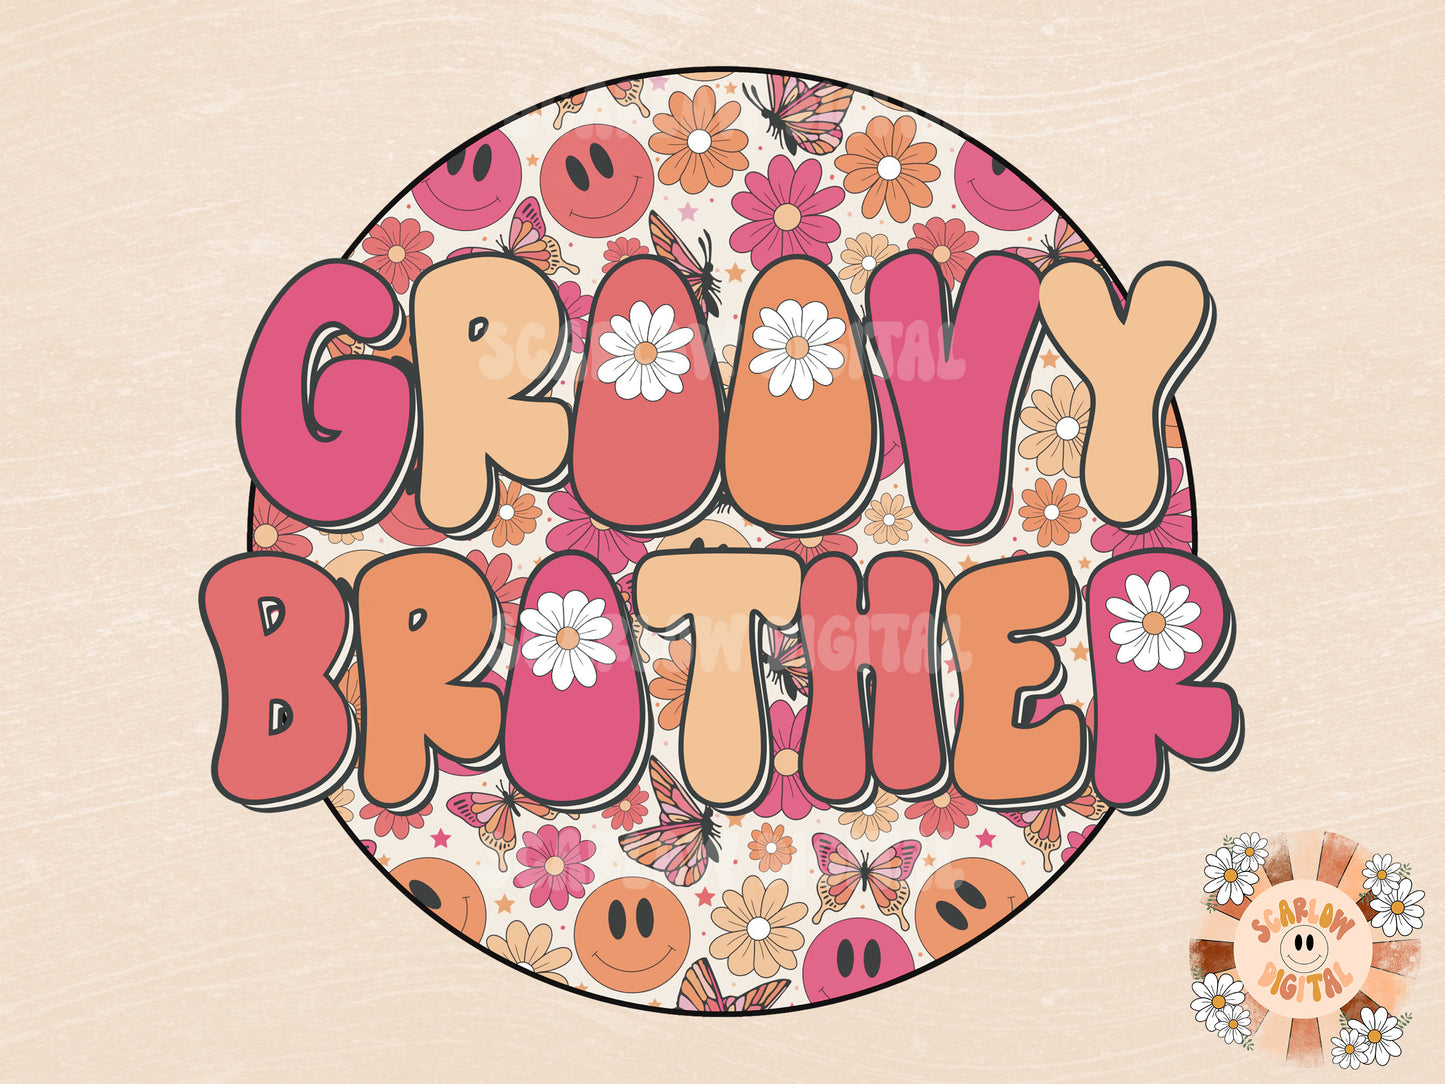 Groovy Brother Hippie PNG-Sublimation Instant Digital Design Download, hippie sublimation, retro png design, groovy sublimation, brother png